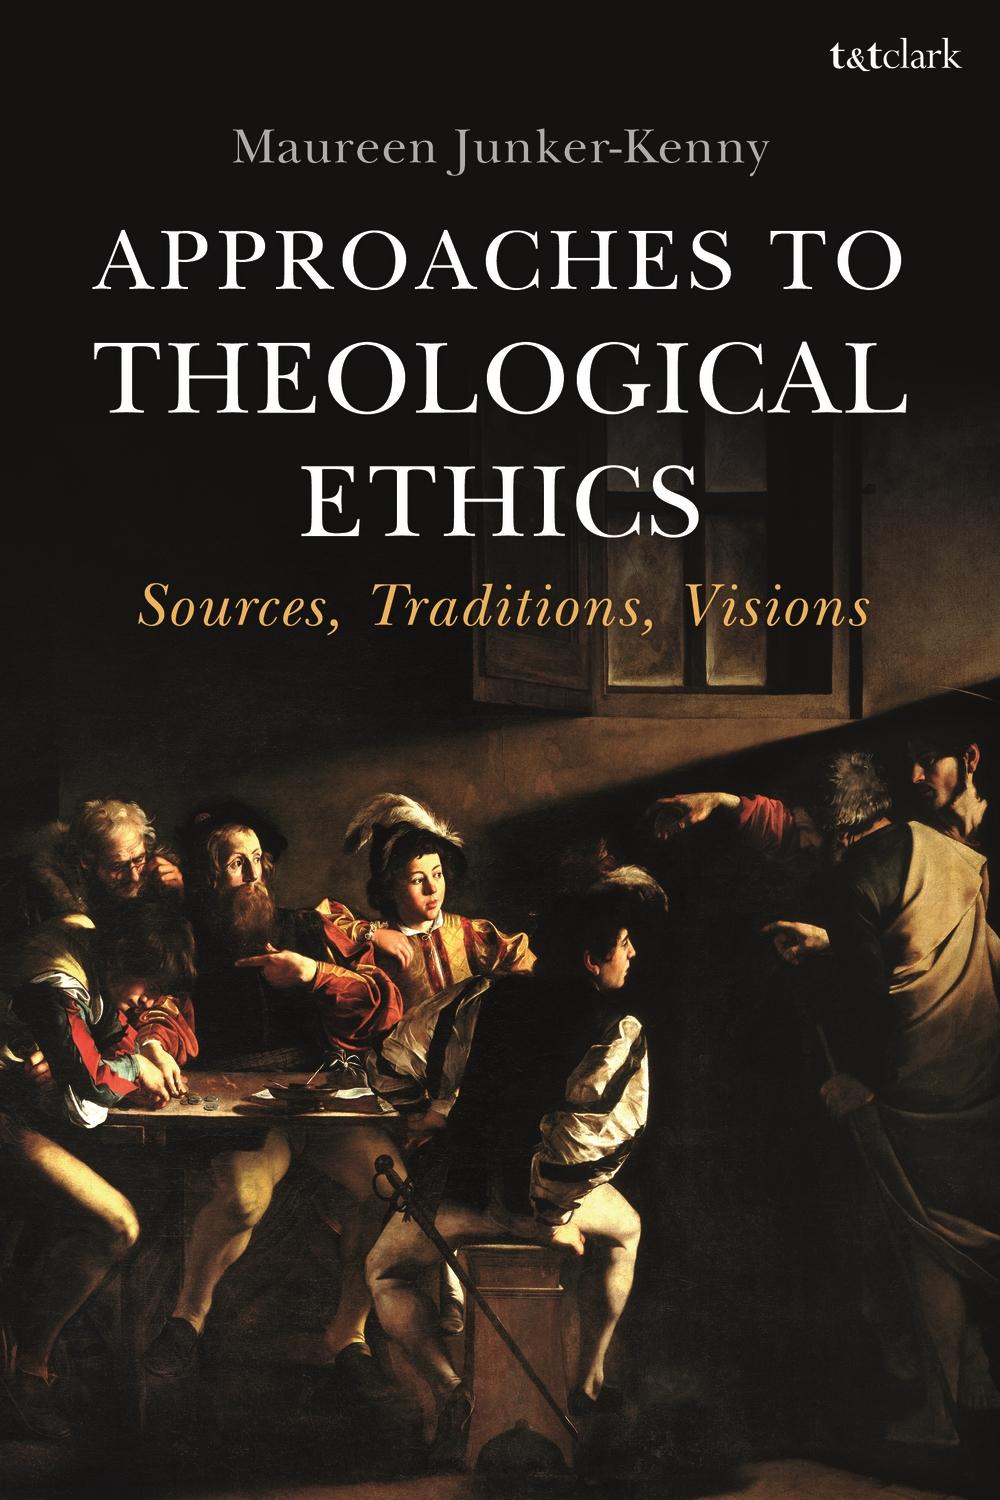 Approaches to Theological Ethics - Maureen Junker-Kenny